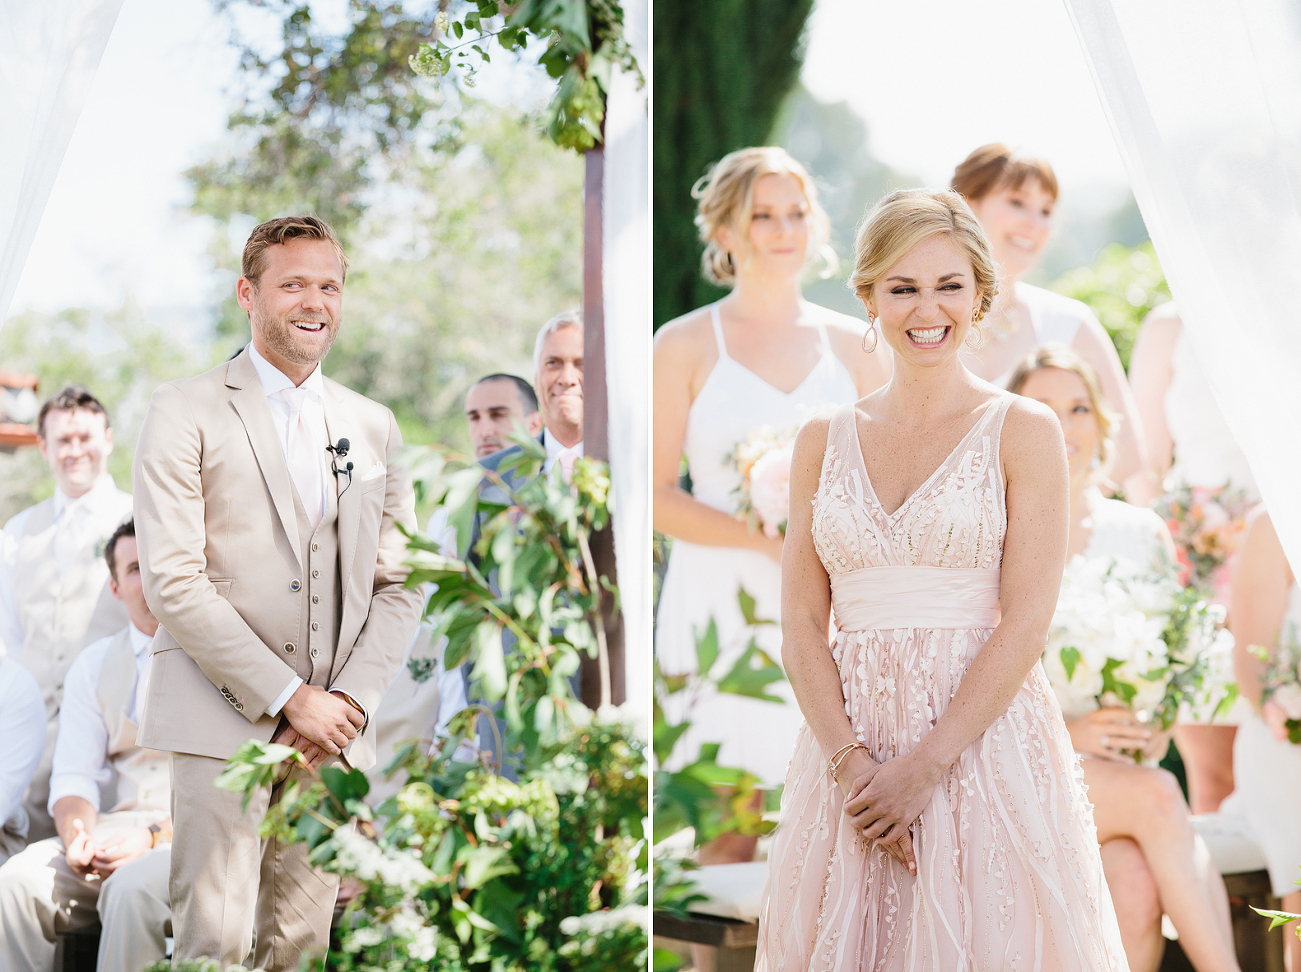 These are photos of Jess and Drew during their ceremony.